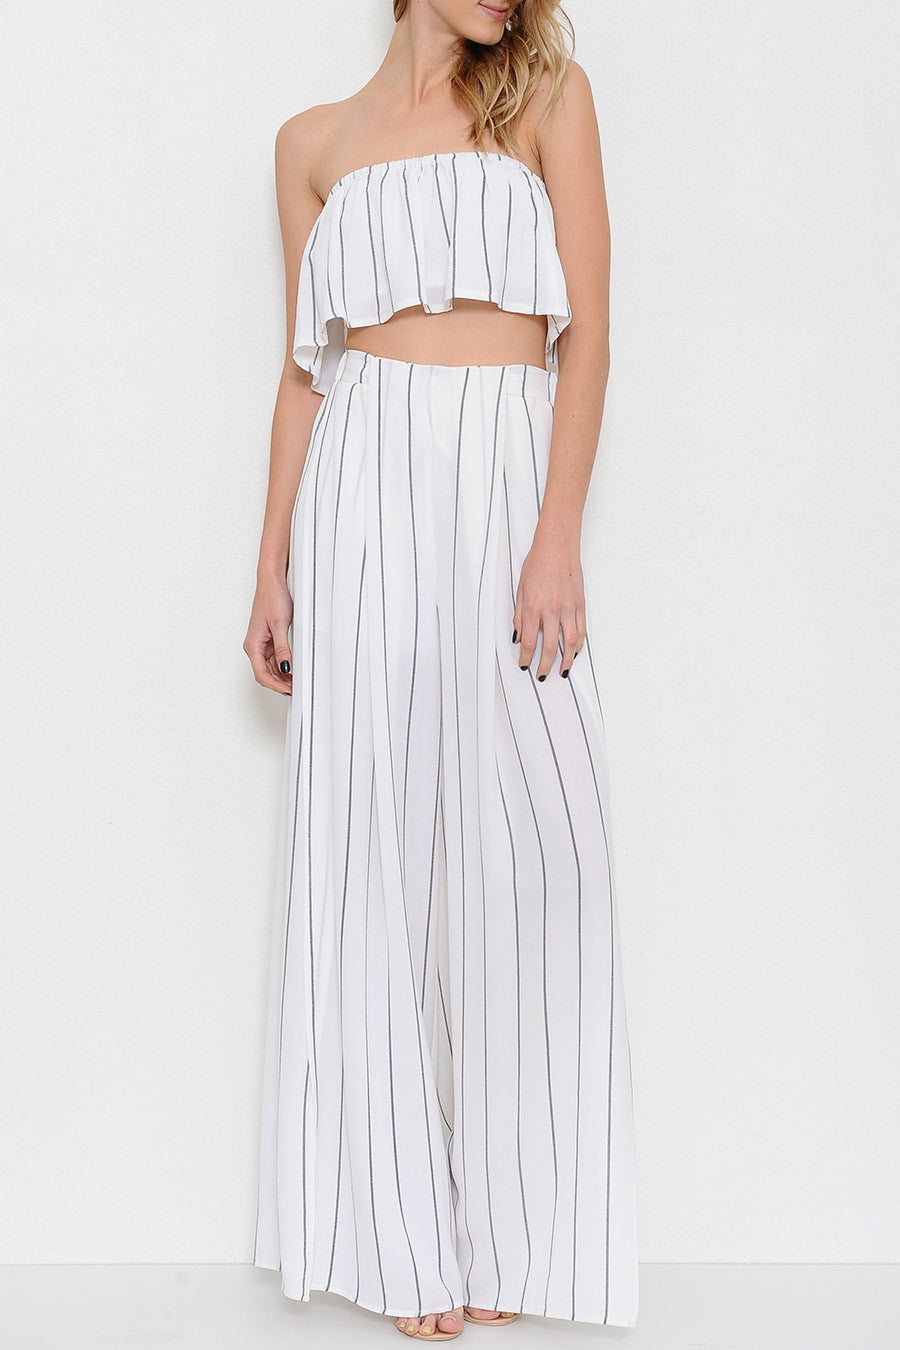 Summer Cut Out White Contrast Pants